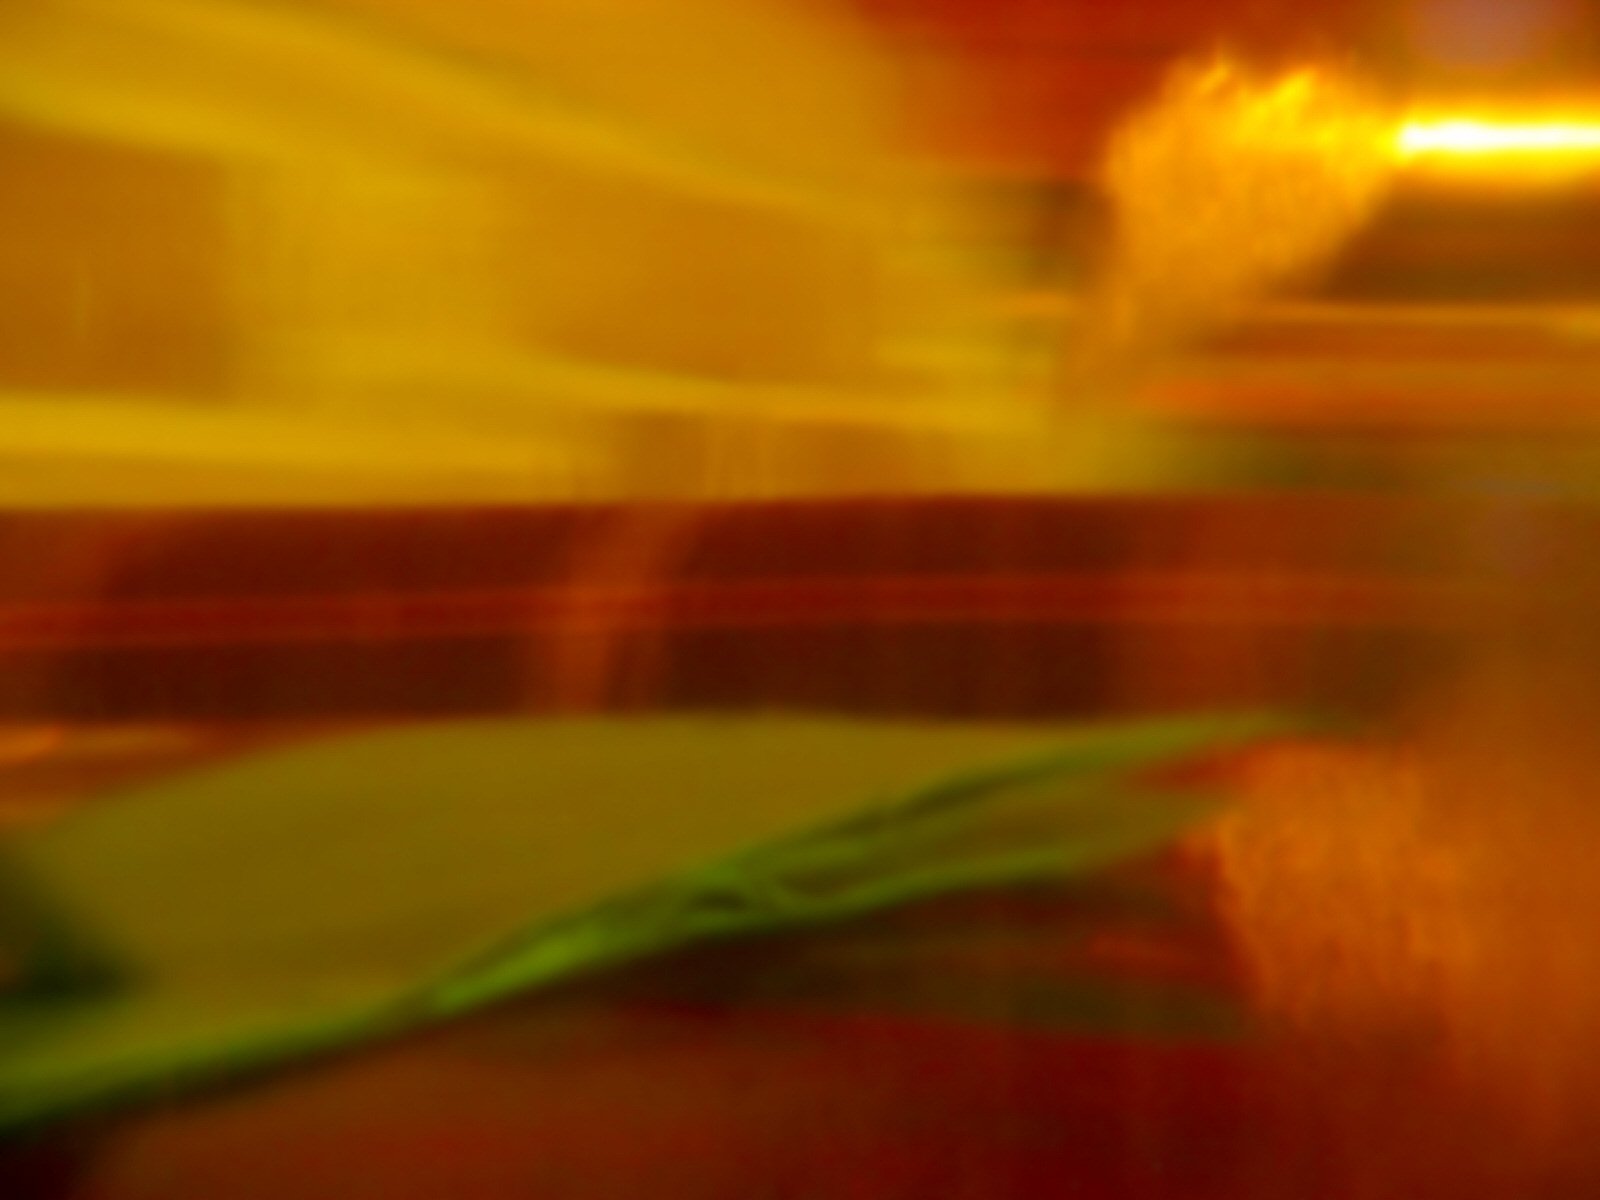 blurry po of a green leaf on a table